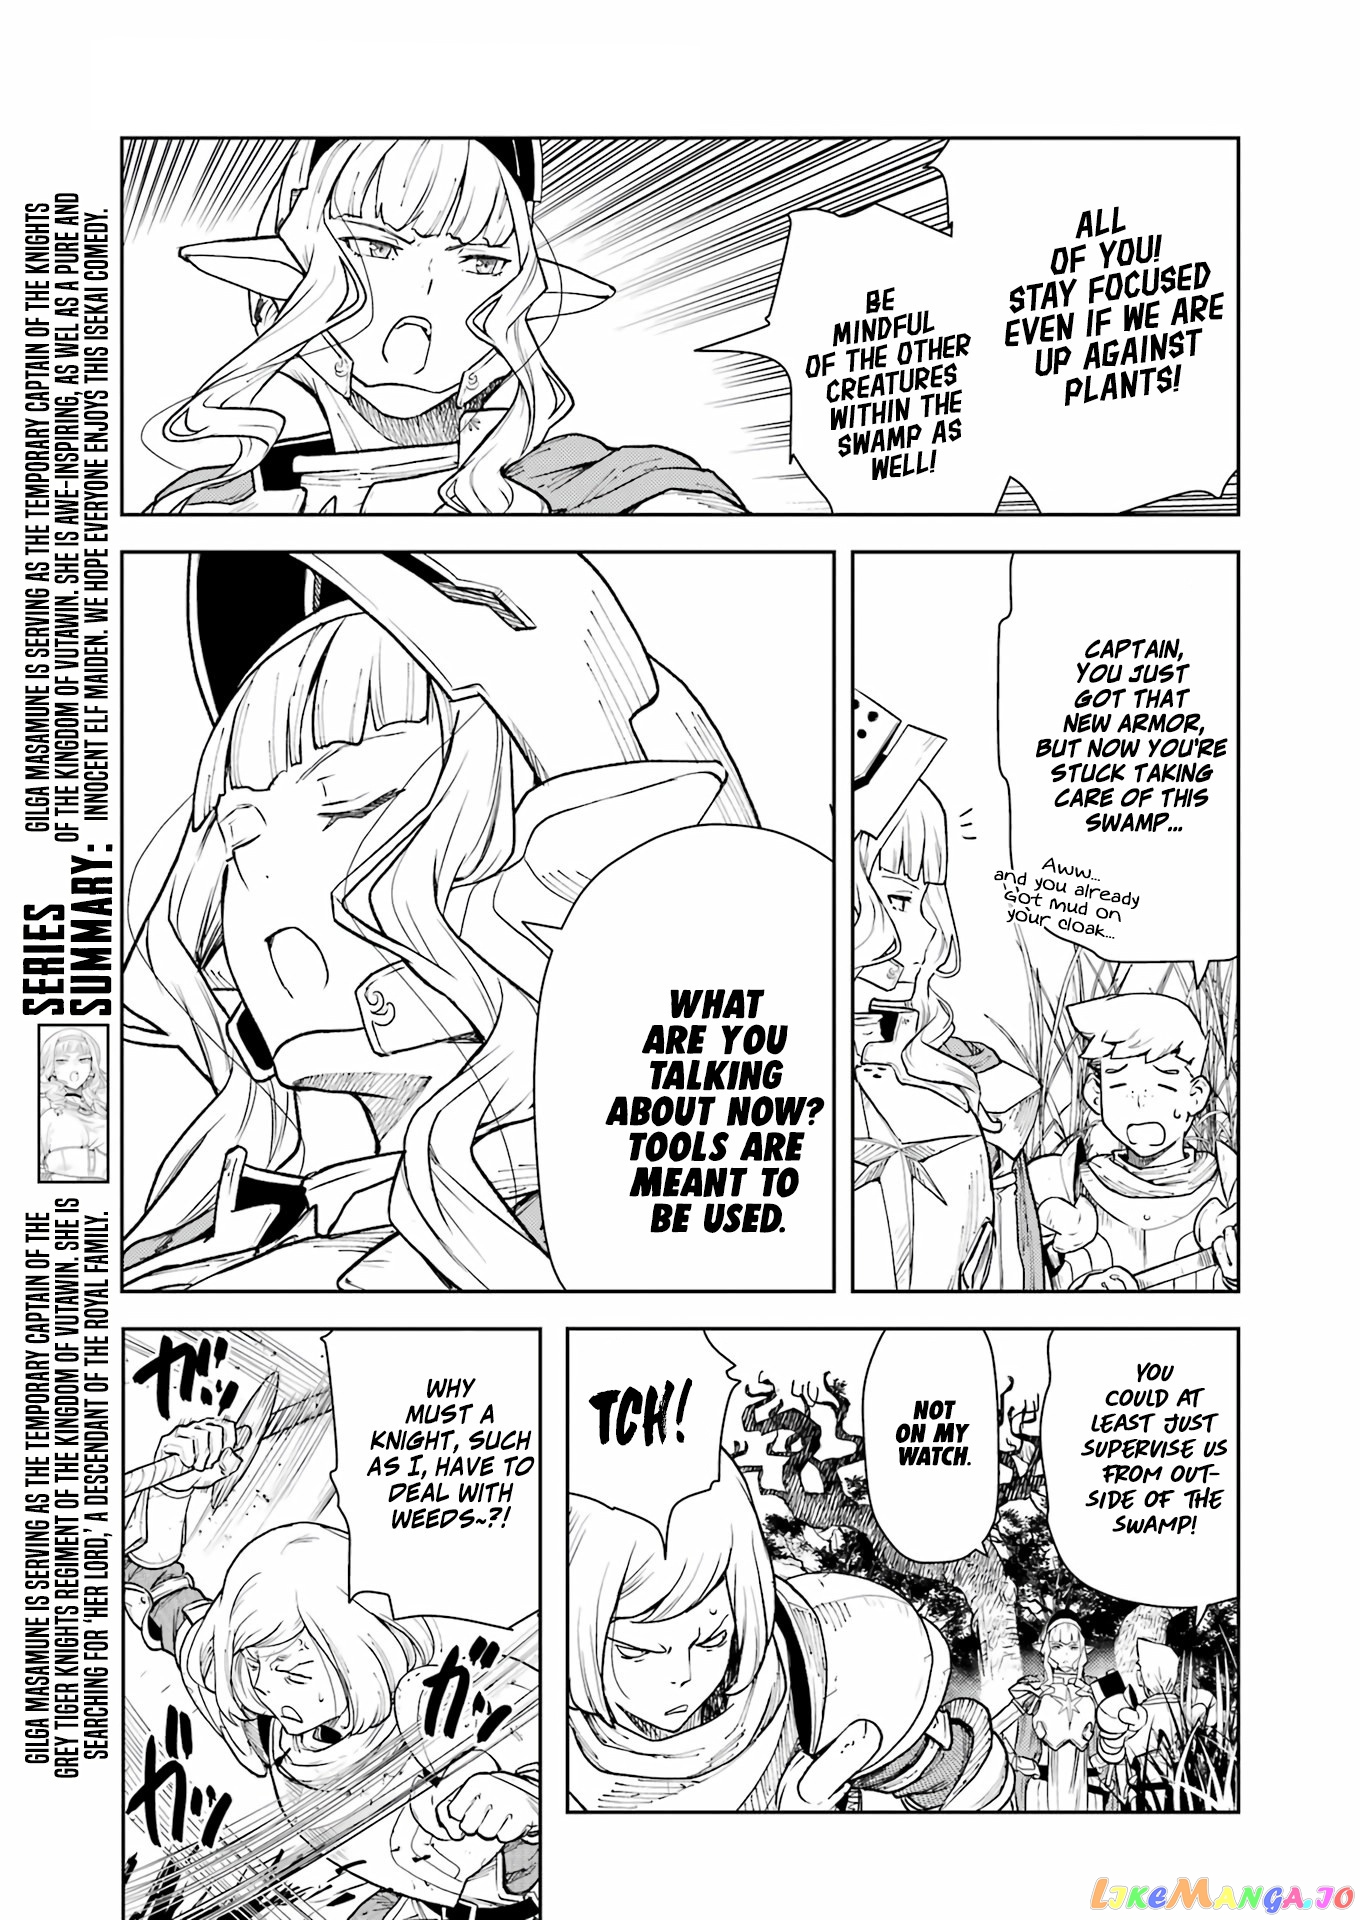 Even The Captain Knight, Miss Elf, Wants To Be A Maiden. chapter 4 - page 4